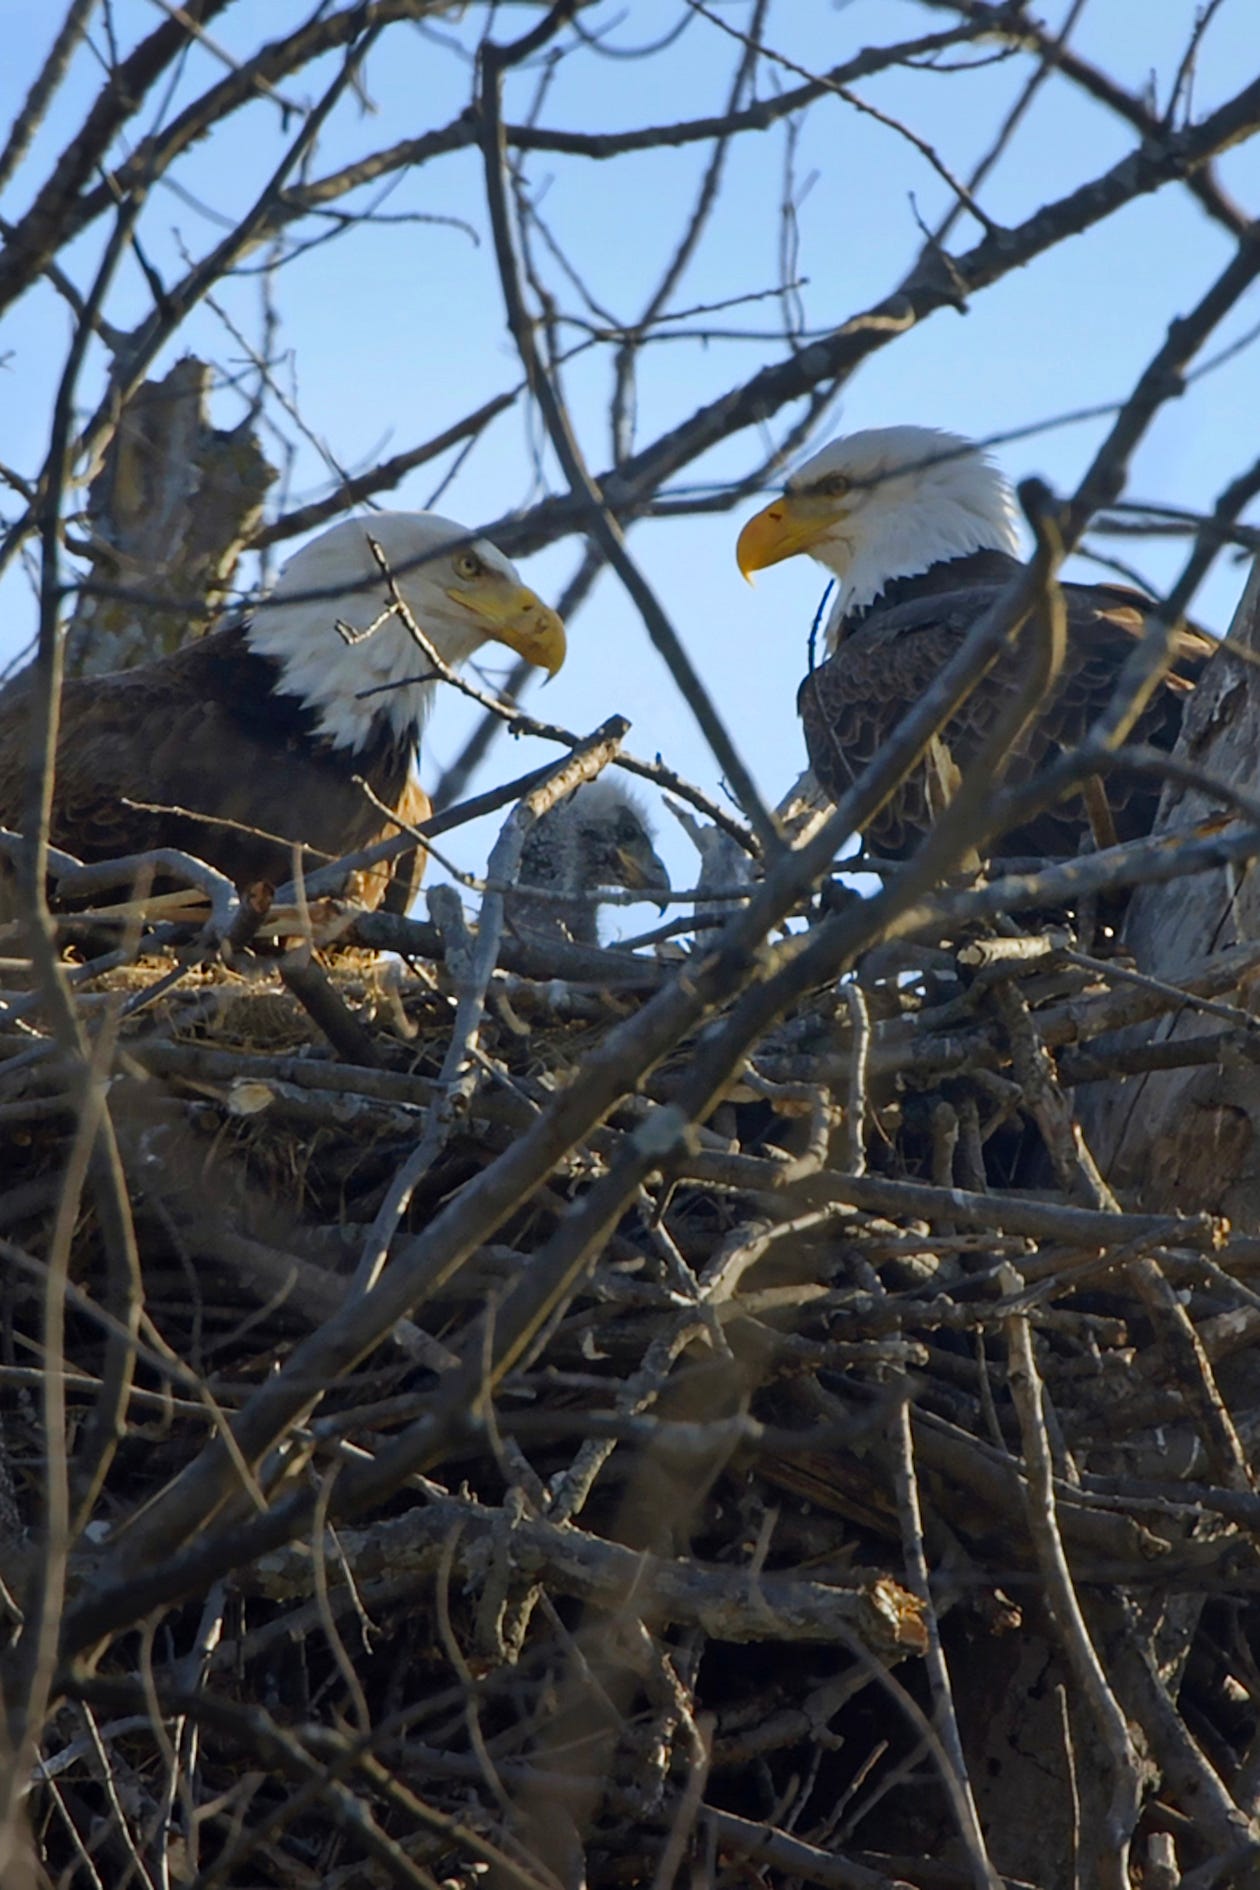 Two bald eagles sit in a nest with their baby on Belle Isle in Detroit, Michigan on May 6, 2020.